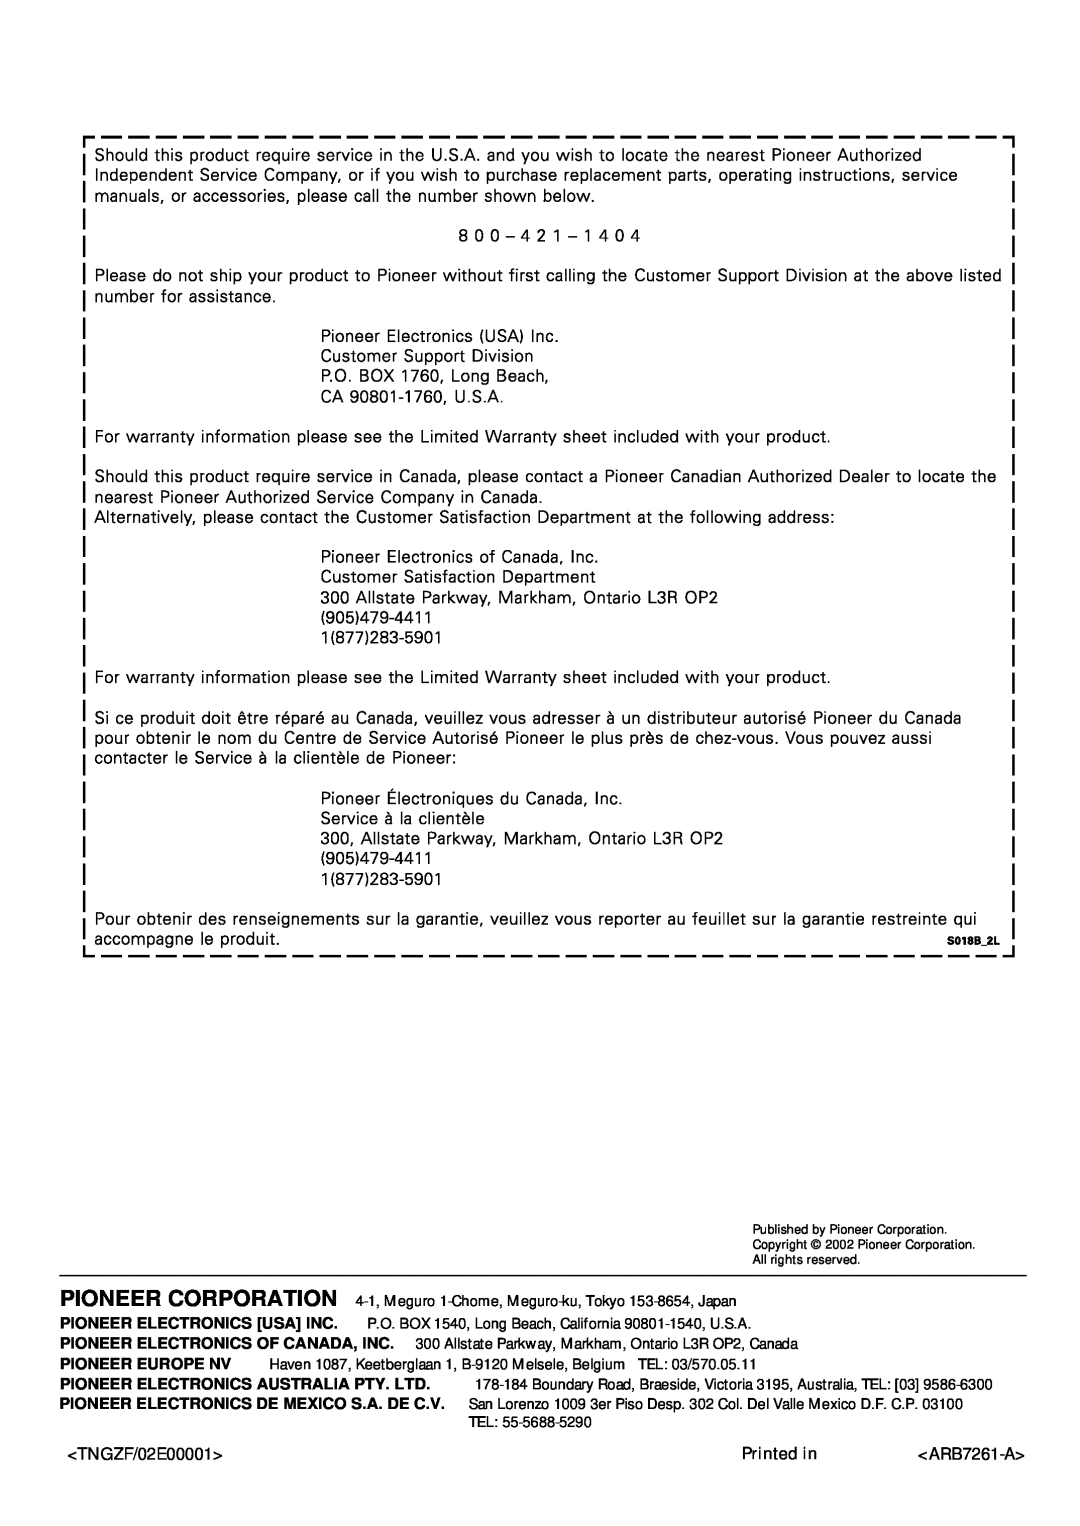 Pioneer VSX-43TX operating instructions <TNGZF/02E00001>, Printed in, ARB7261-A 